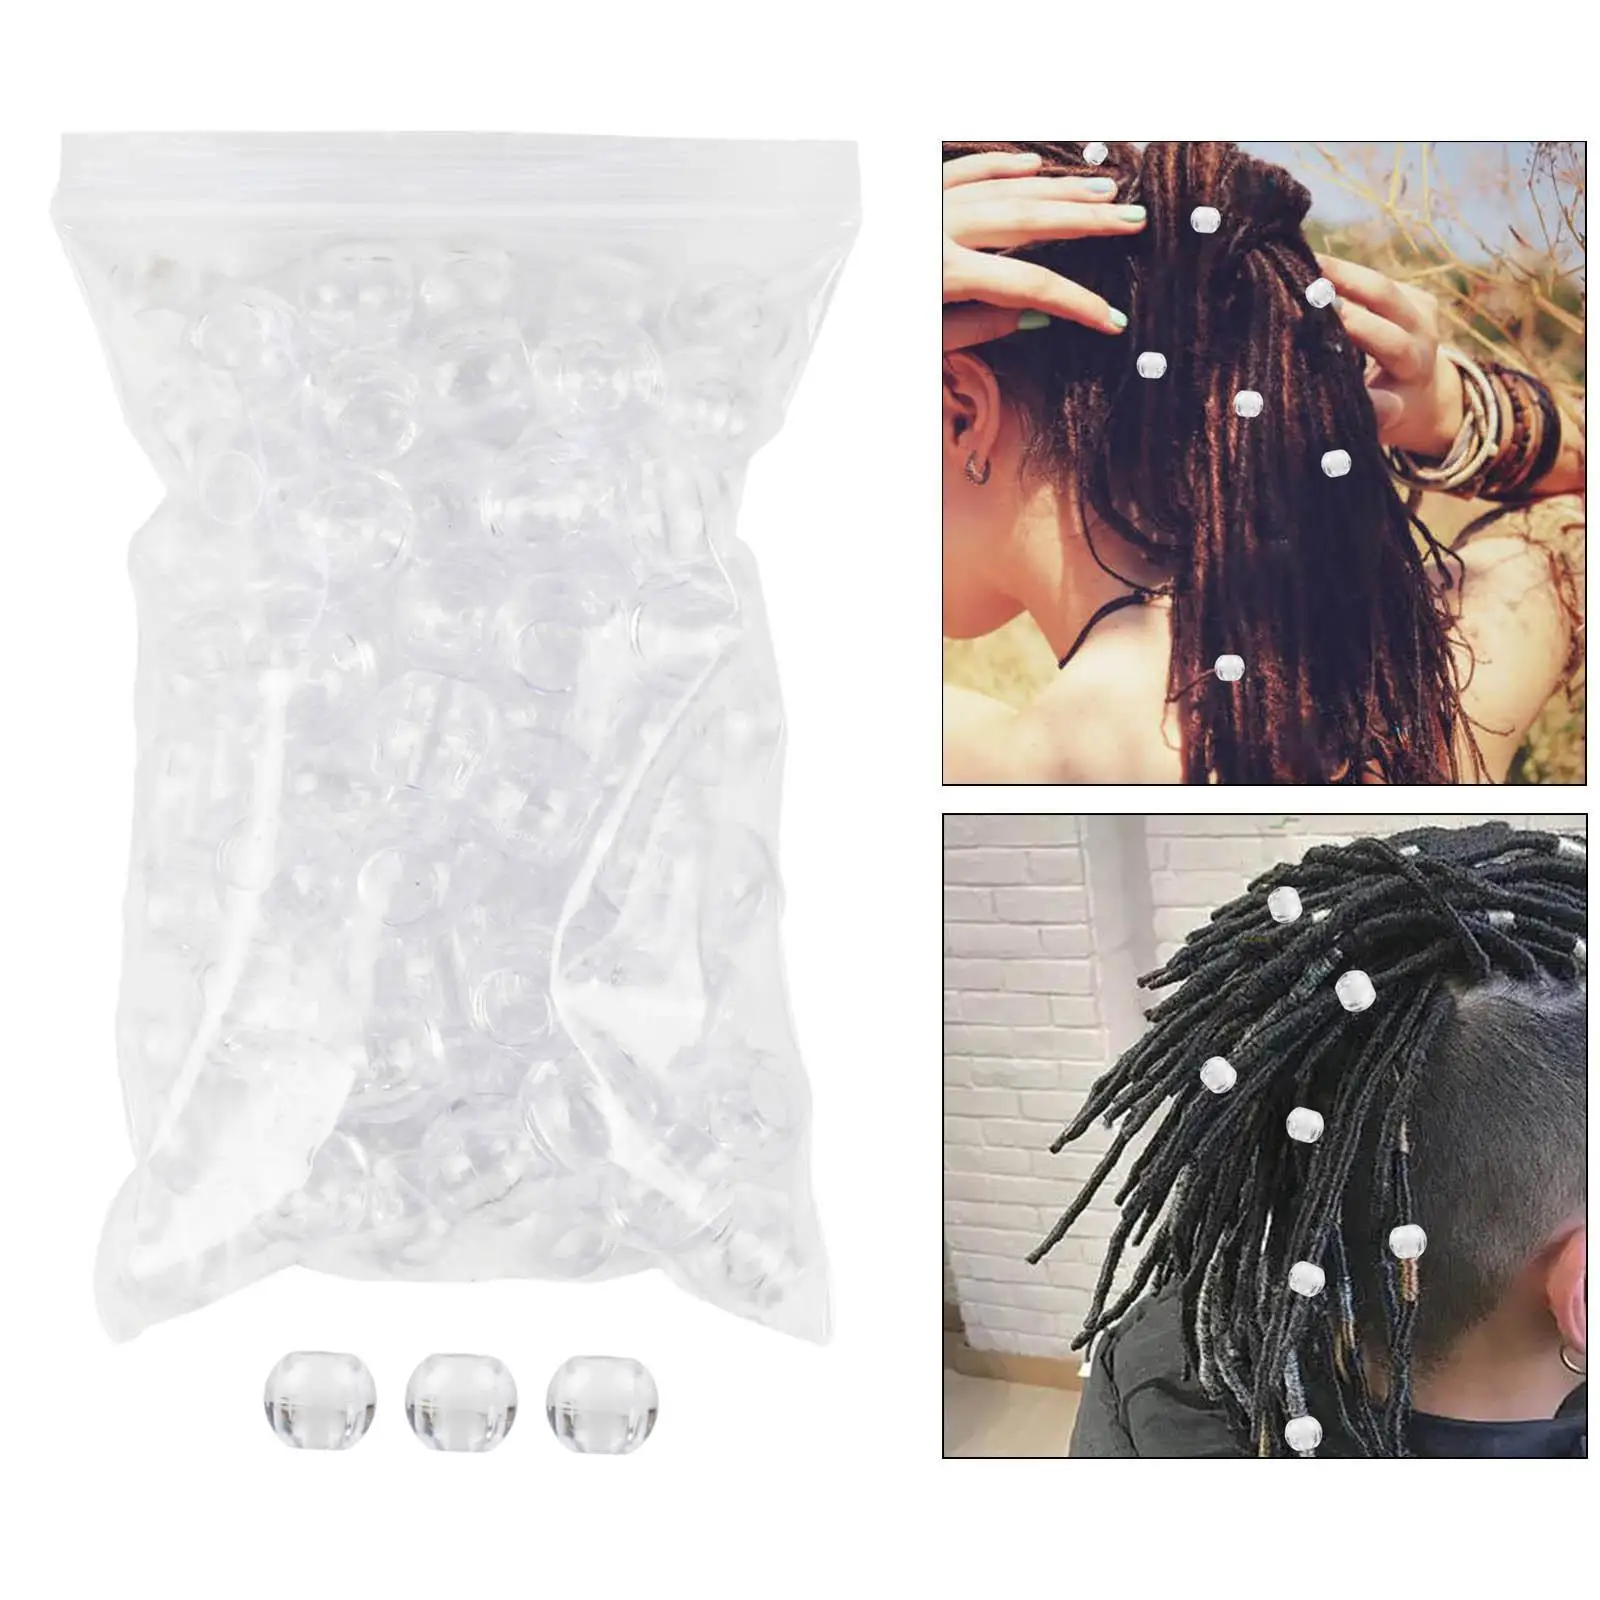 100x Dreadlock Beads 16mm Dia 8mm Hole Crafts Kit Hair Extension Beads for Dreadlock Wig